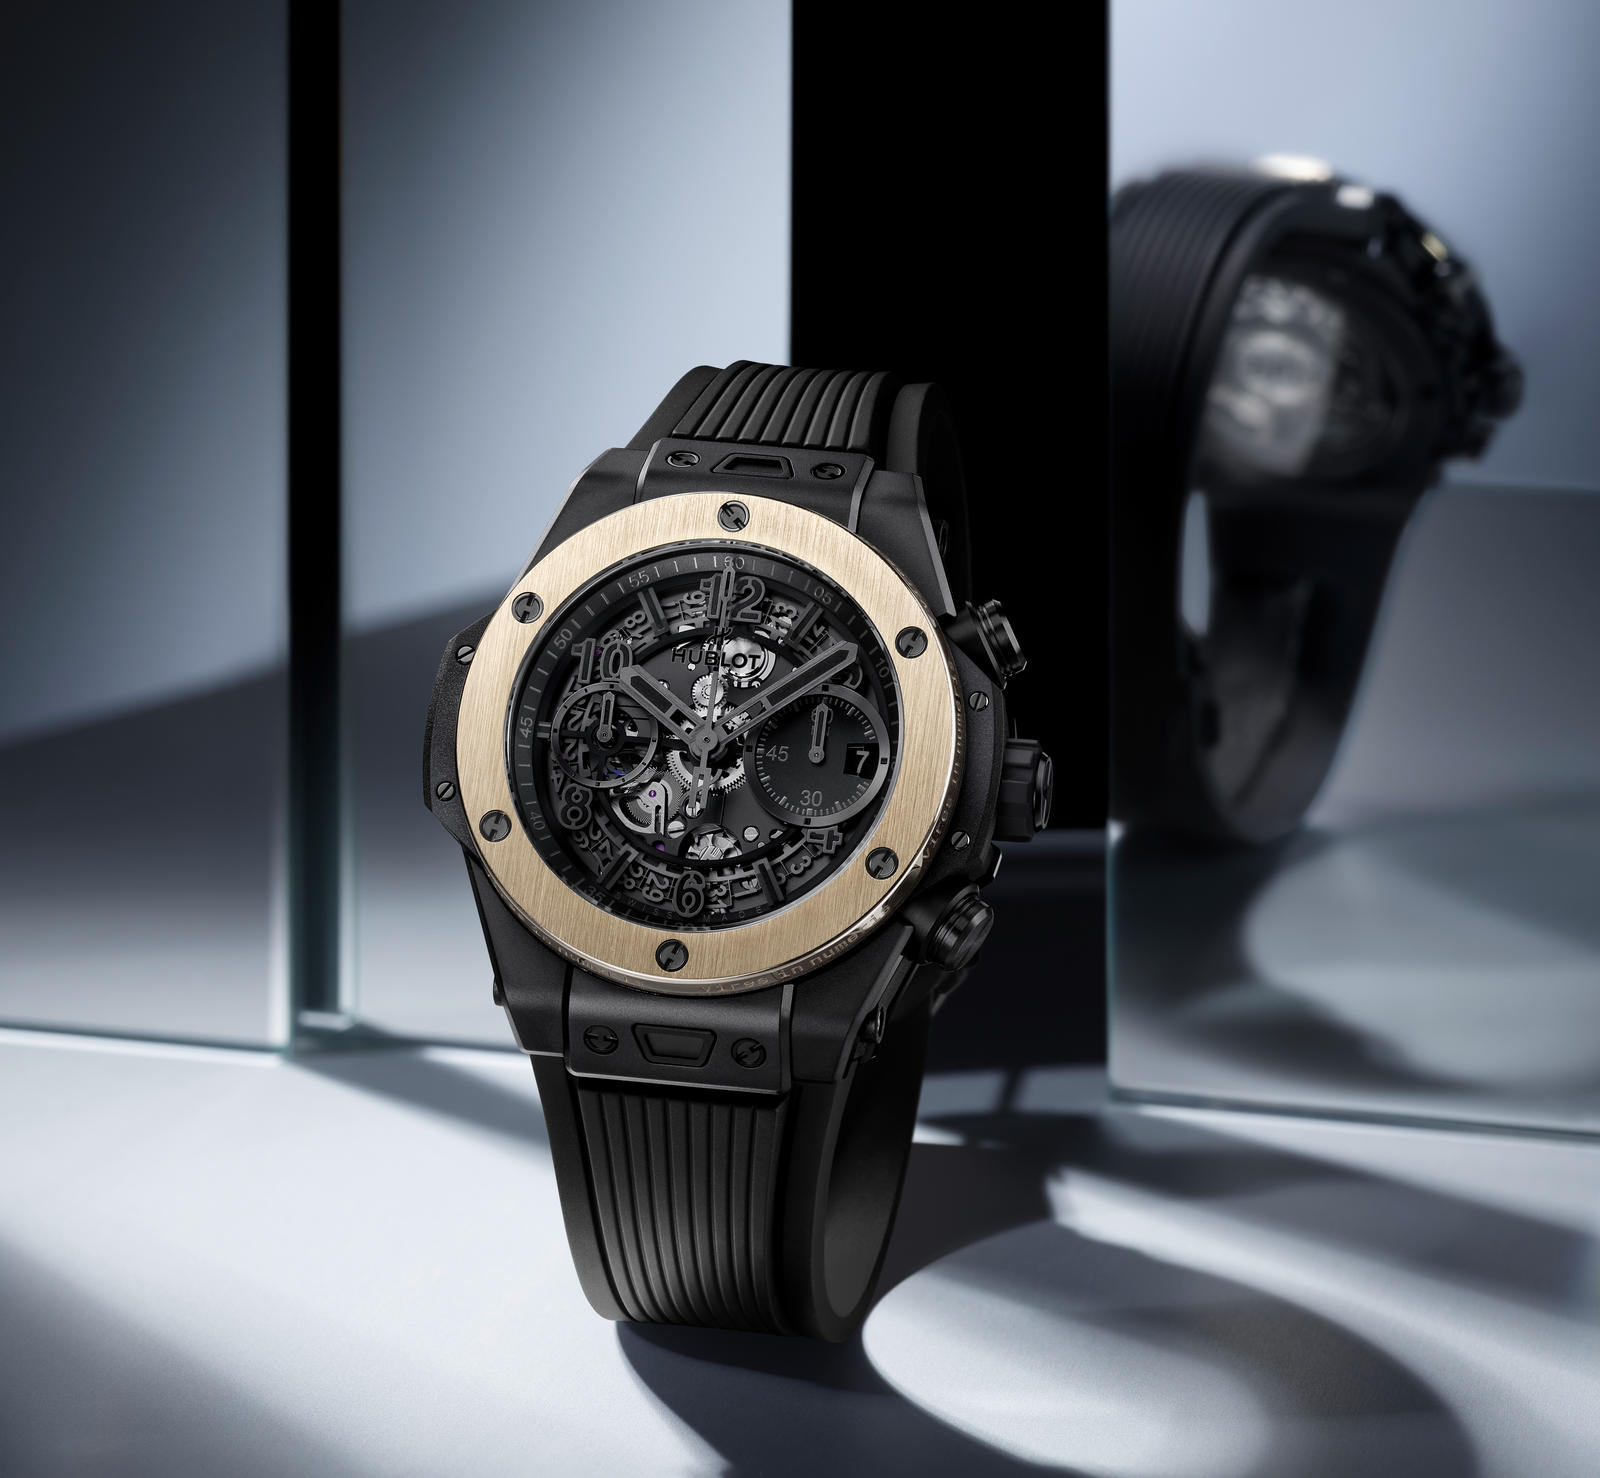 Perfect for Bitcoin millionaires – Hublot has unveiled a limited edition watch that is also a crypto digital asset wallet